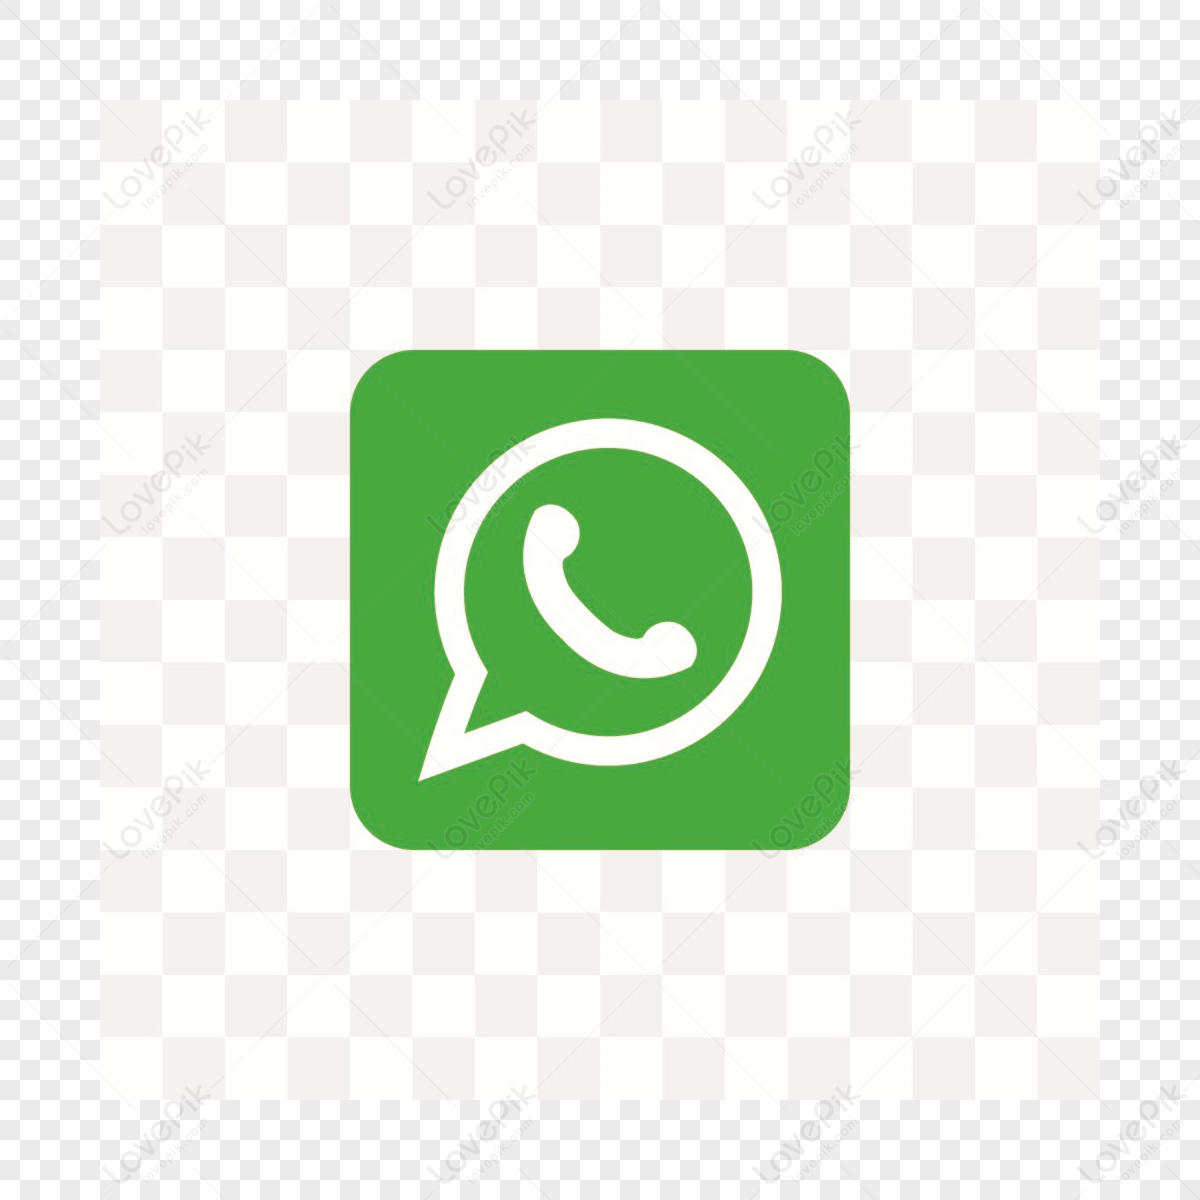 Whatsapp icon App icon Communication and media icon png download -  1262*1262 - Free Transparent Whatsapp Icon png Download. - CleanPNG /  KissPNG